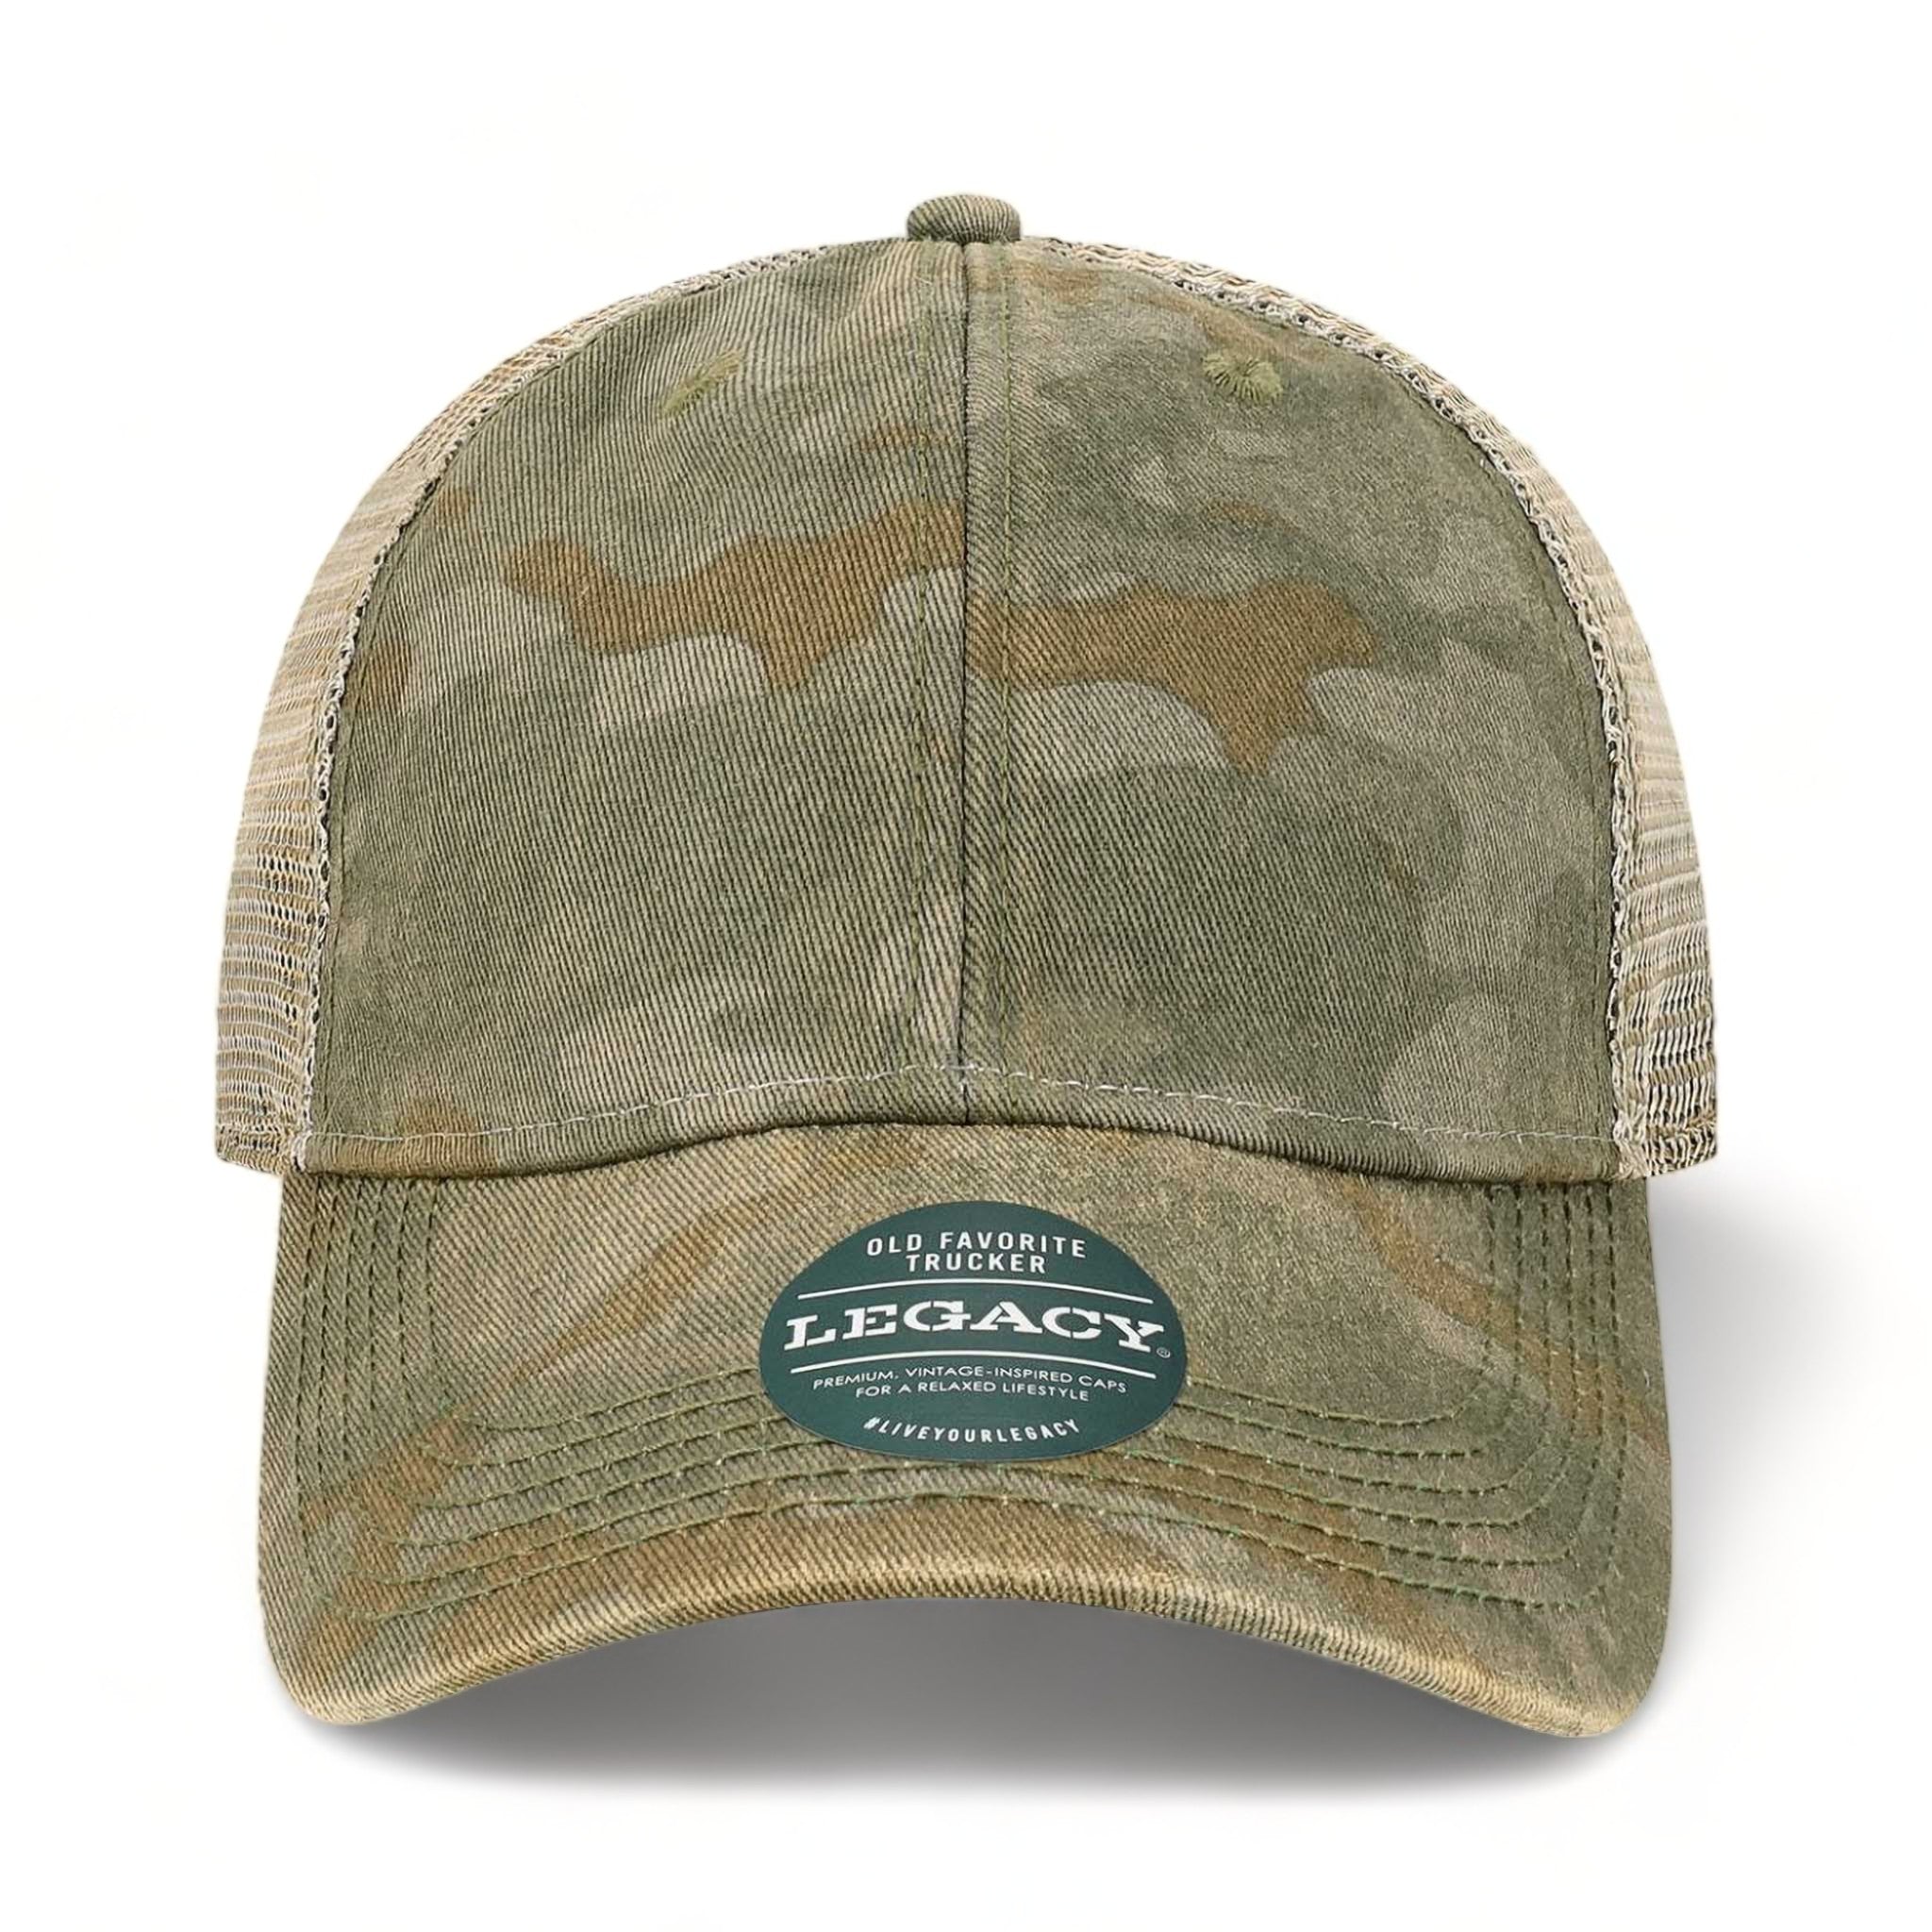 Front view of LEGACY OFA custom hat in green field camo and java